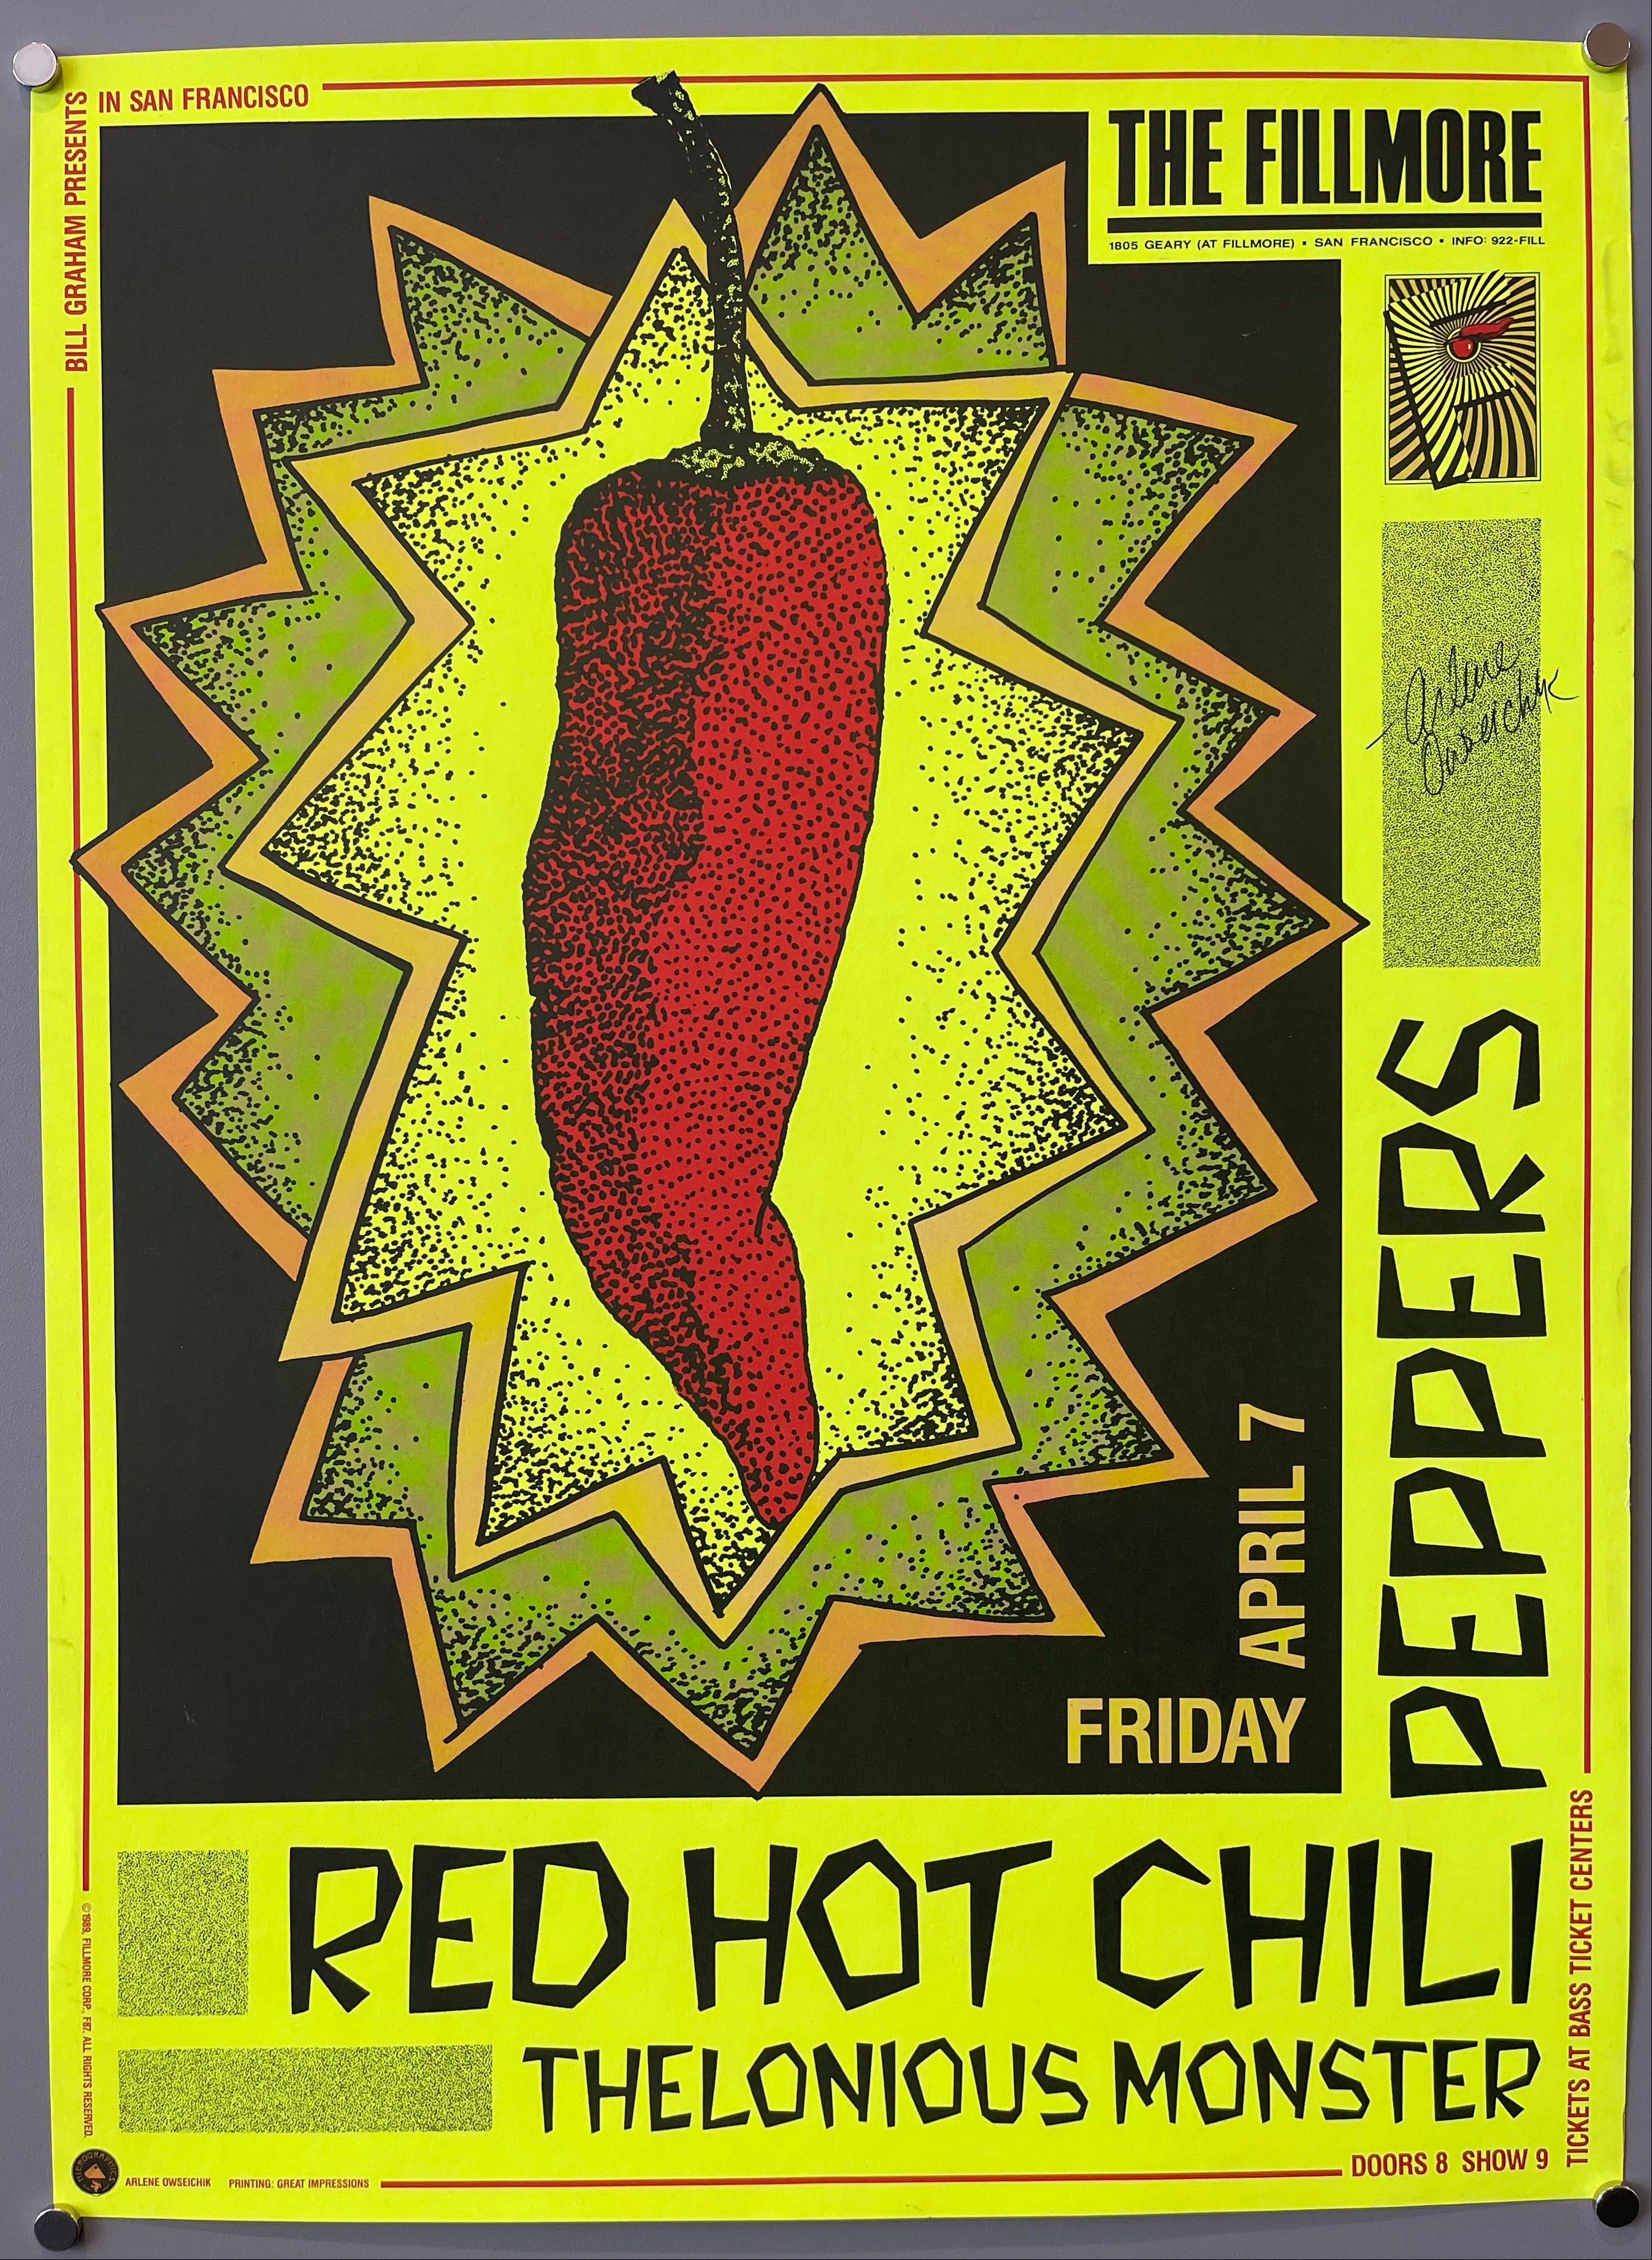 Bill Graham Presents in San Francisco Red Hot Chili Pepper Posters